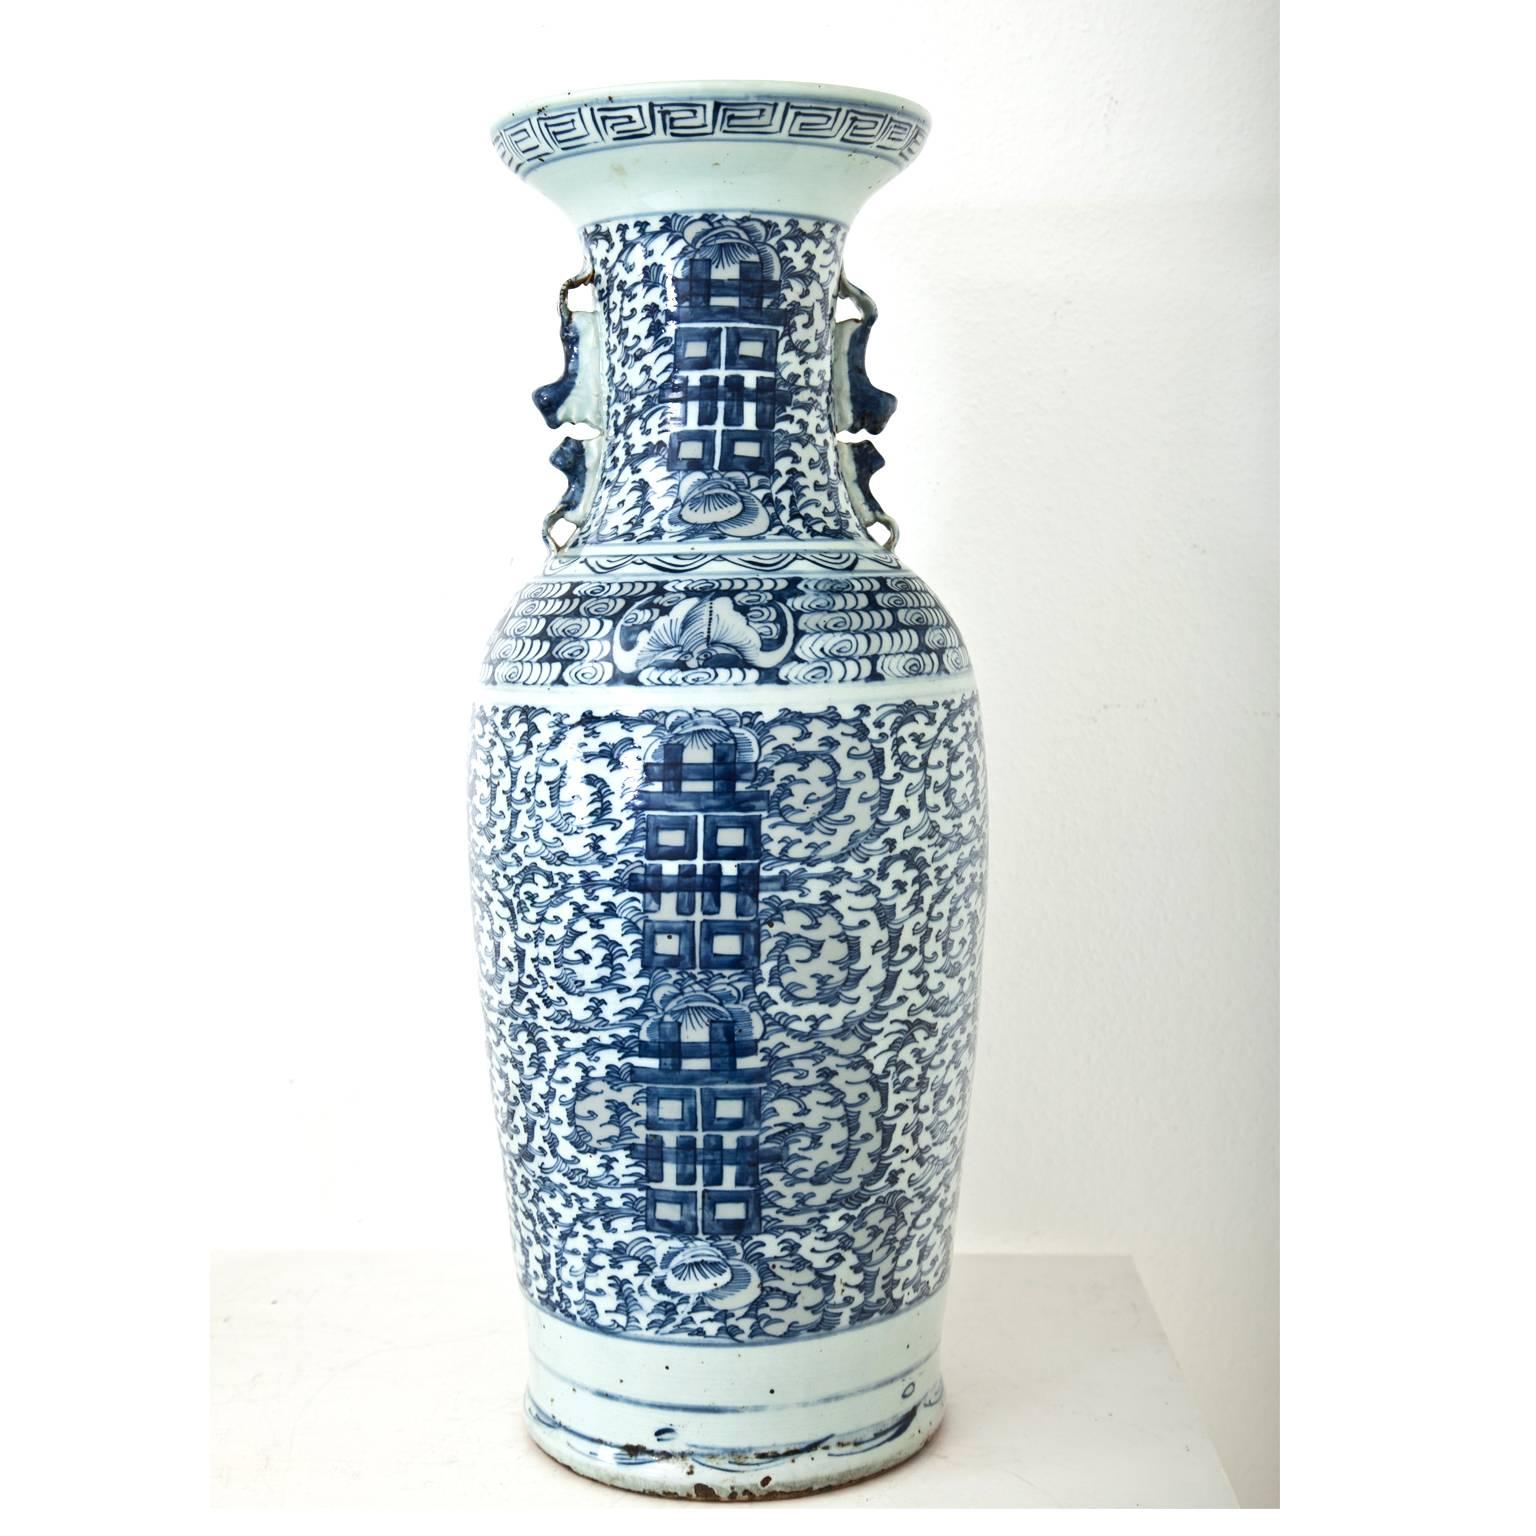 Chinoiserie Chinese Porcellain Vase, 19th-20th Century